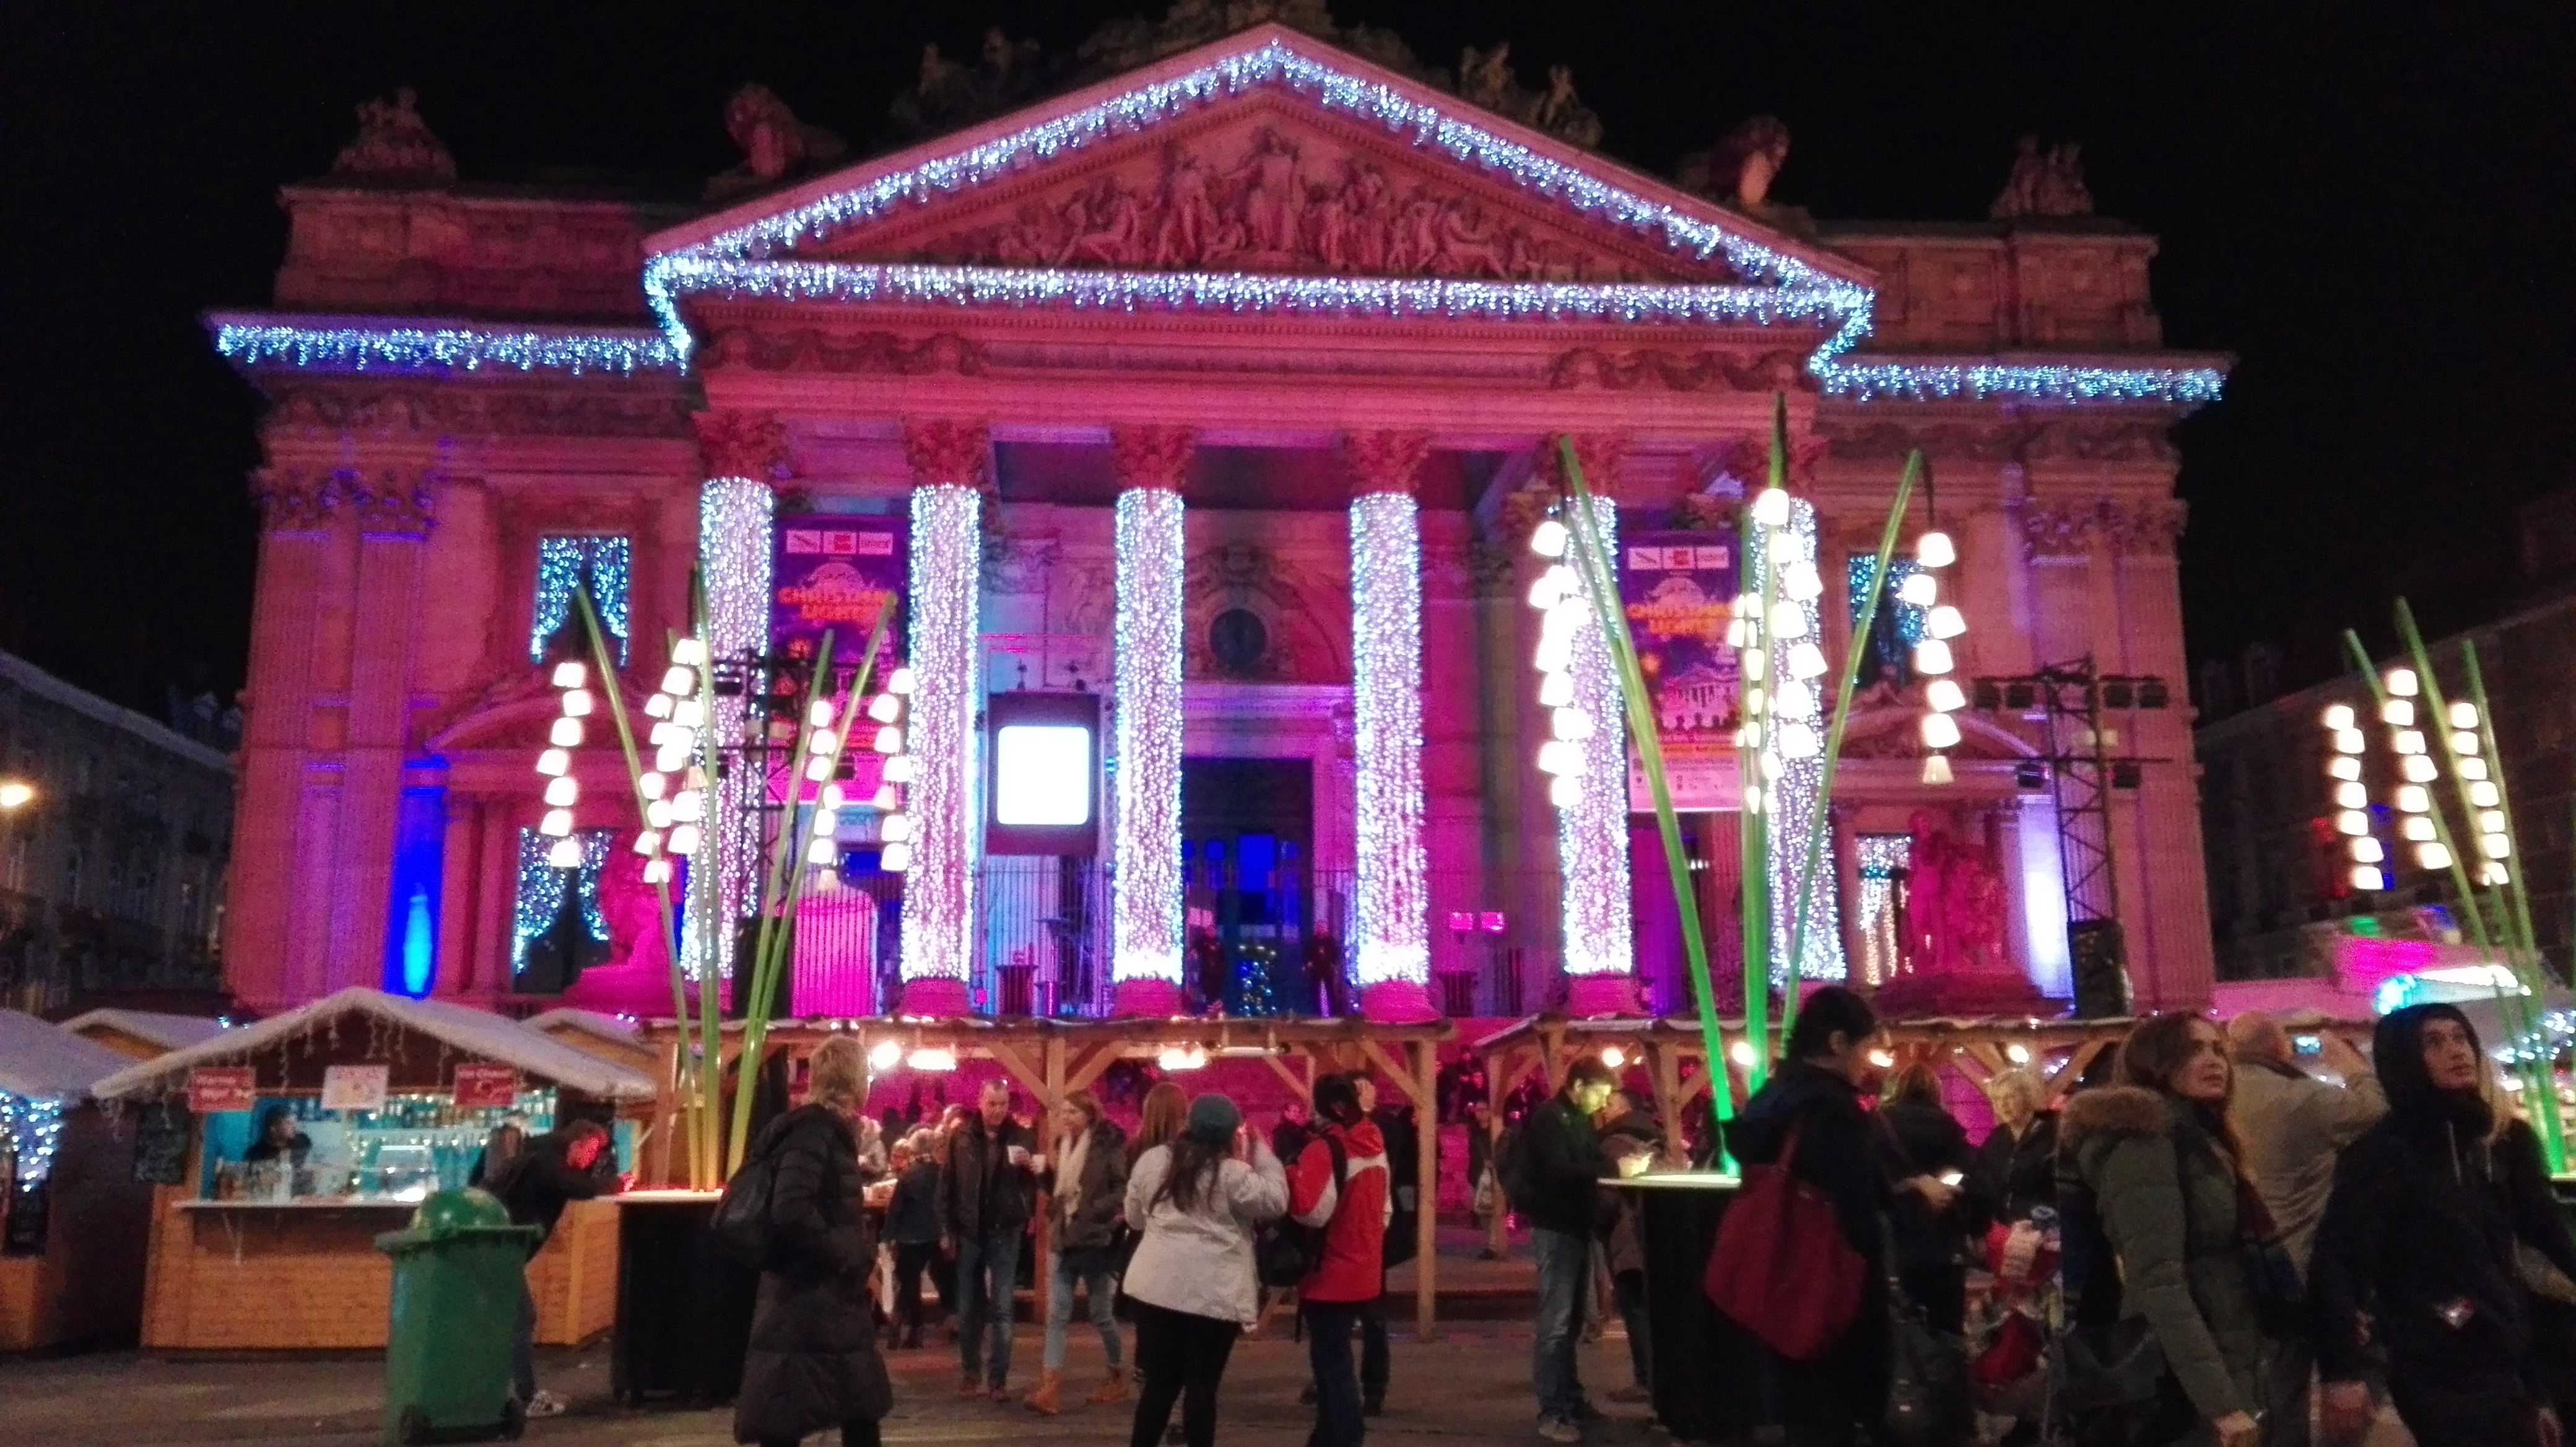 Christmas Market at Boulevard Anspach in front of La Bourse (photo by author)